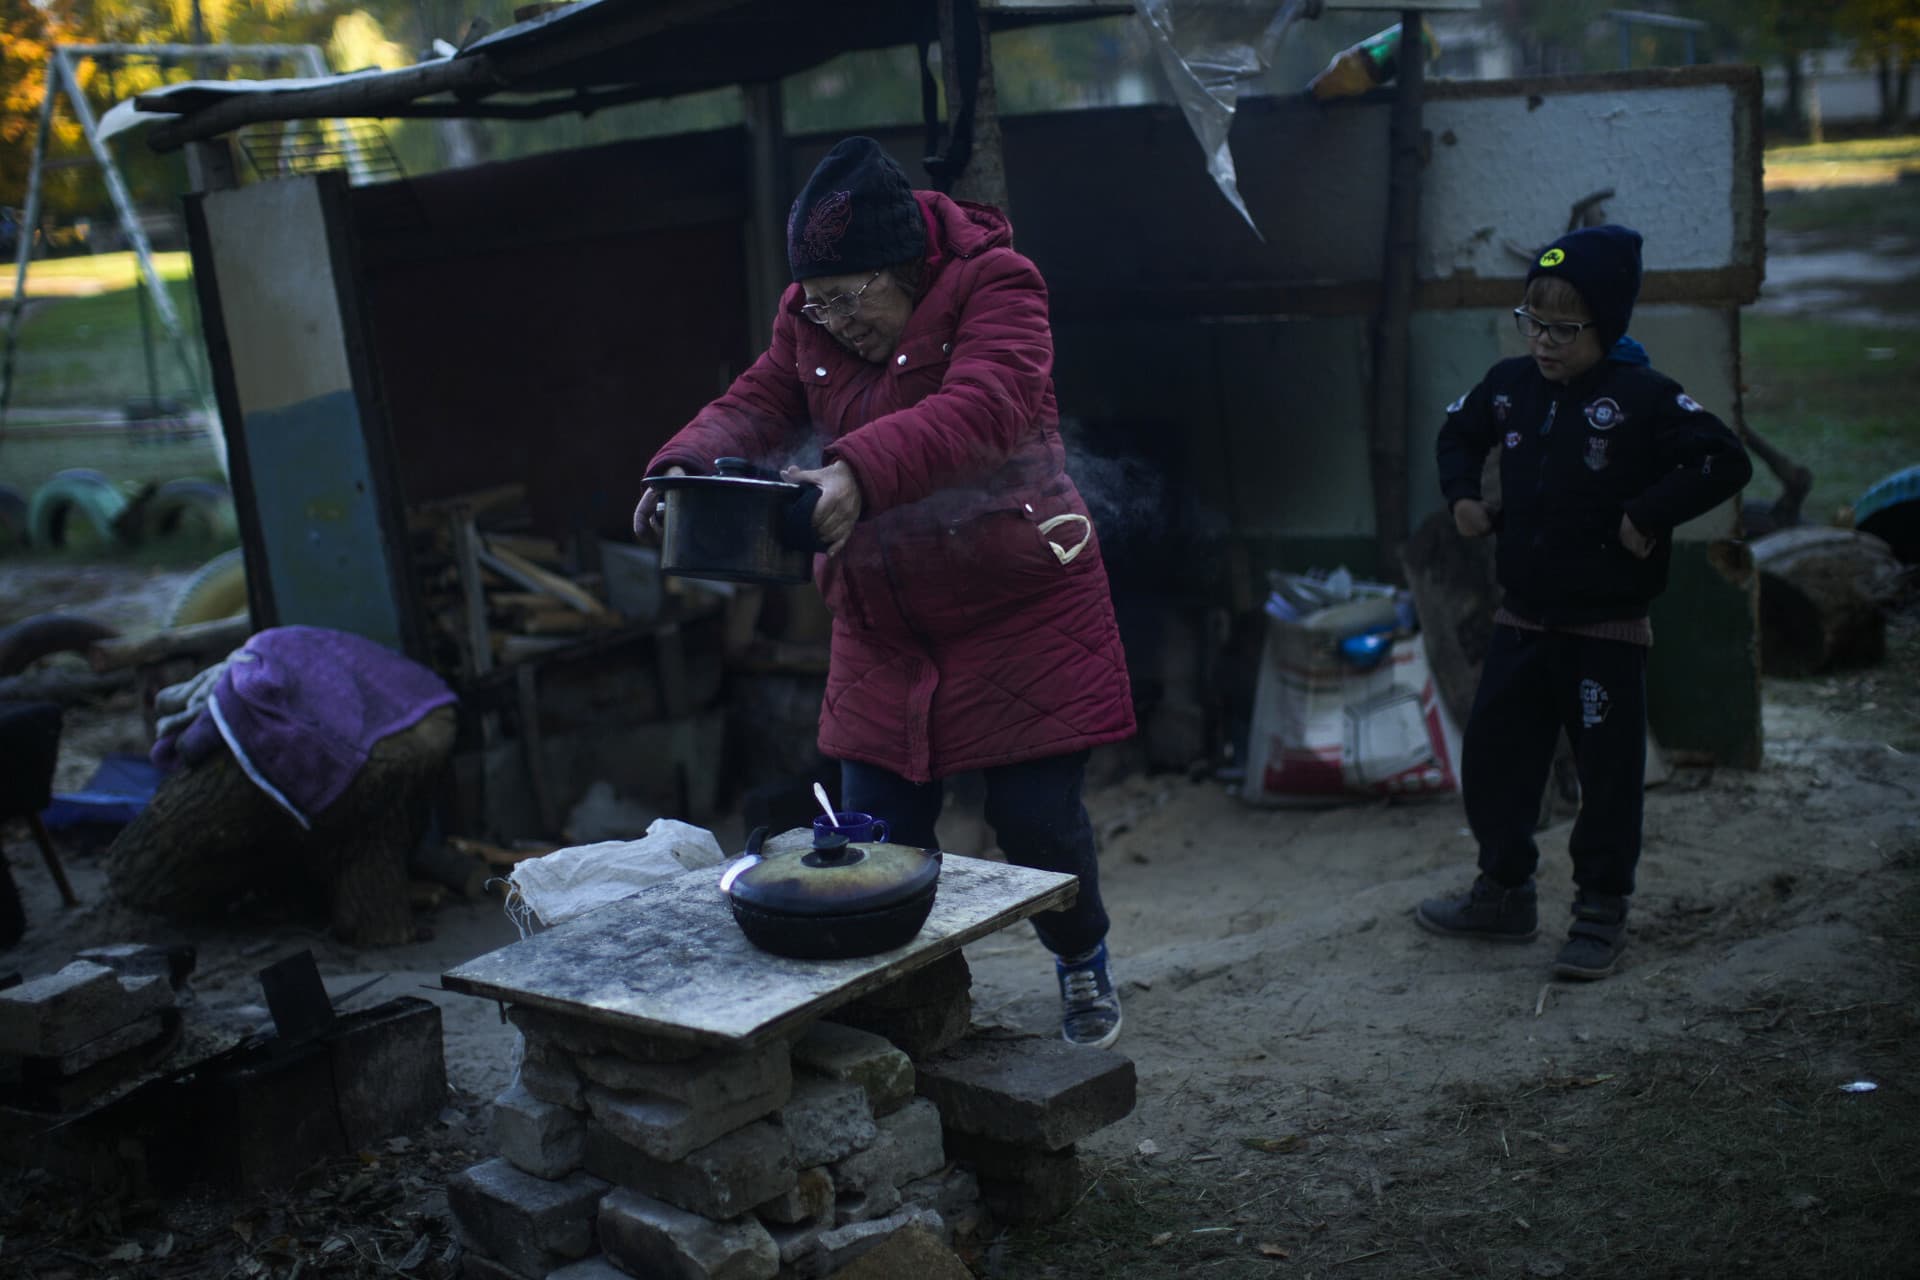 Iryna Panchenko removes a pot of food from a makeshift stove next to her grandchild Artem in Kivsharivka